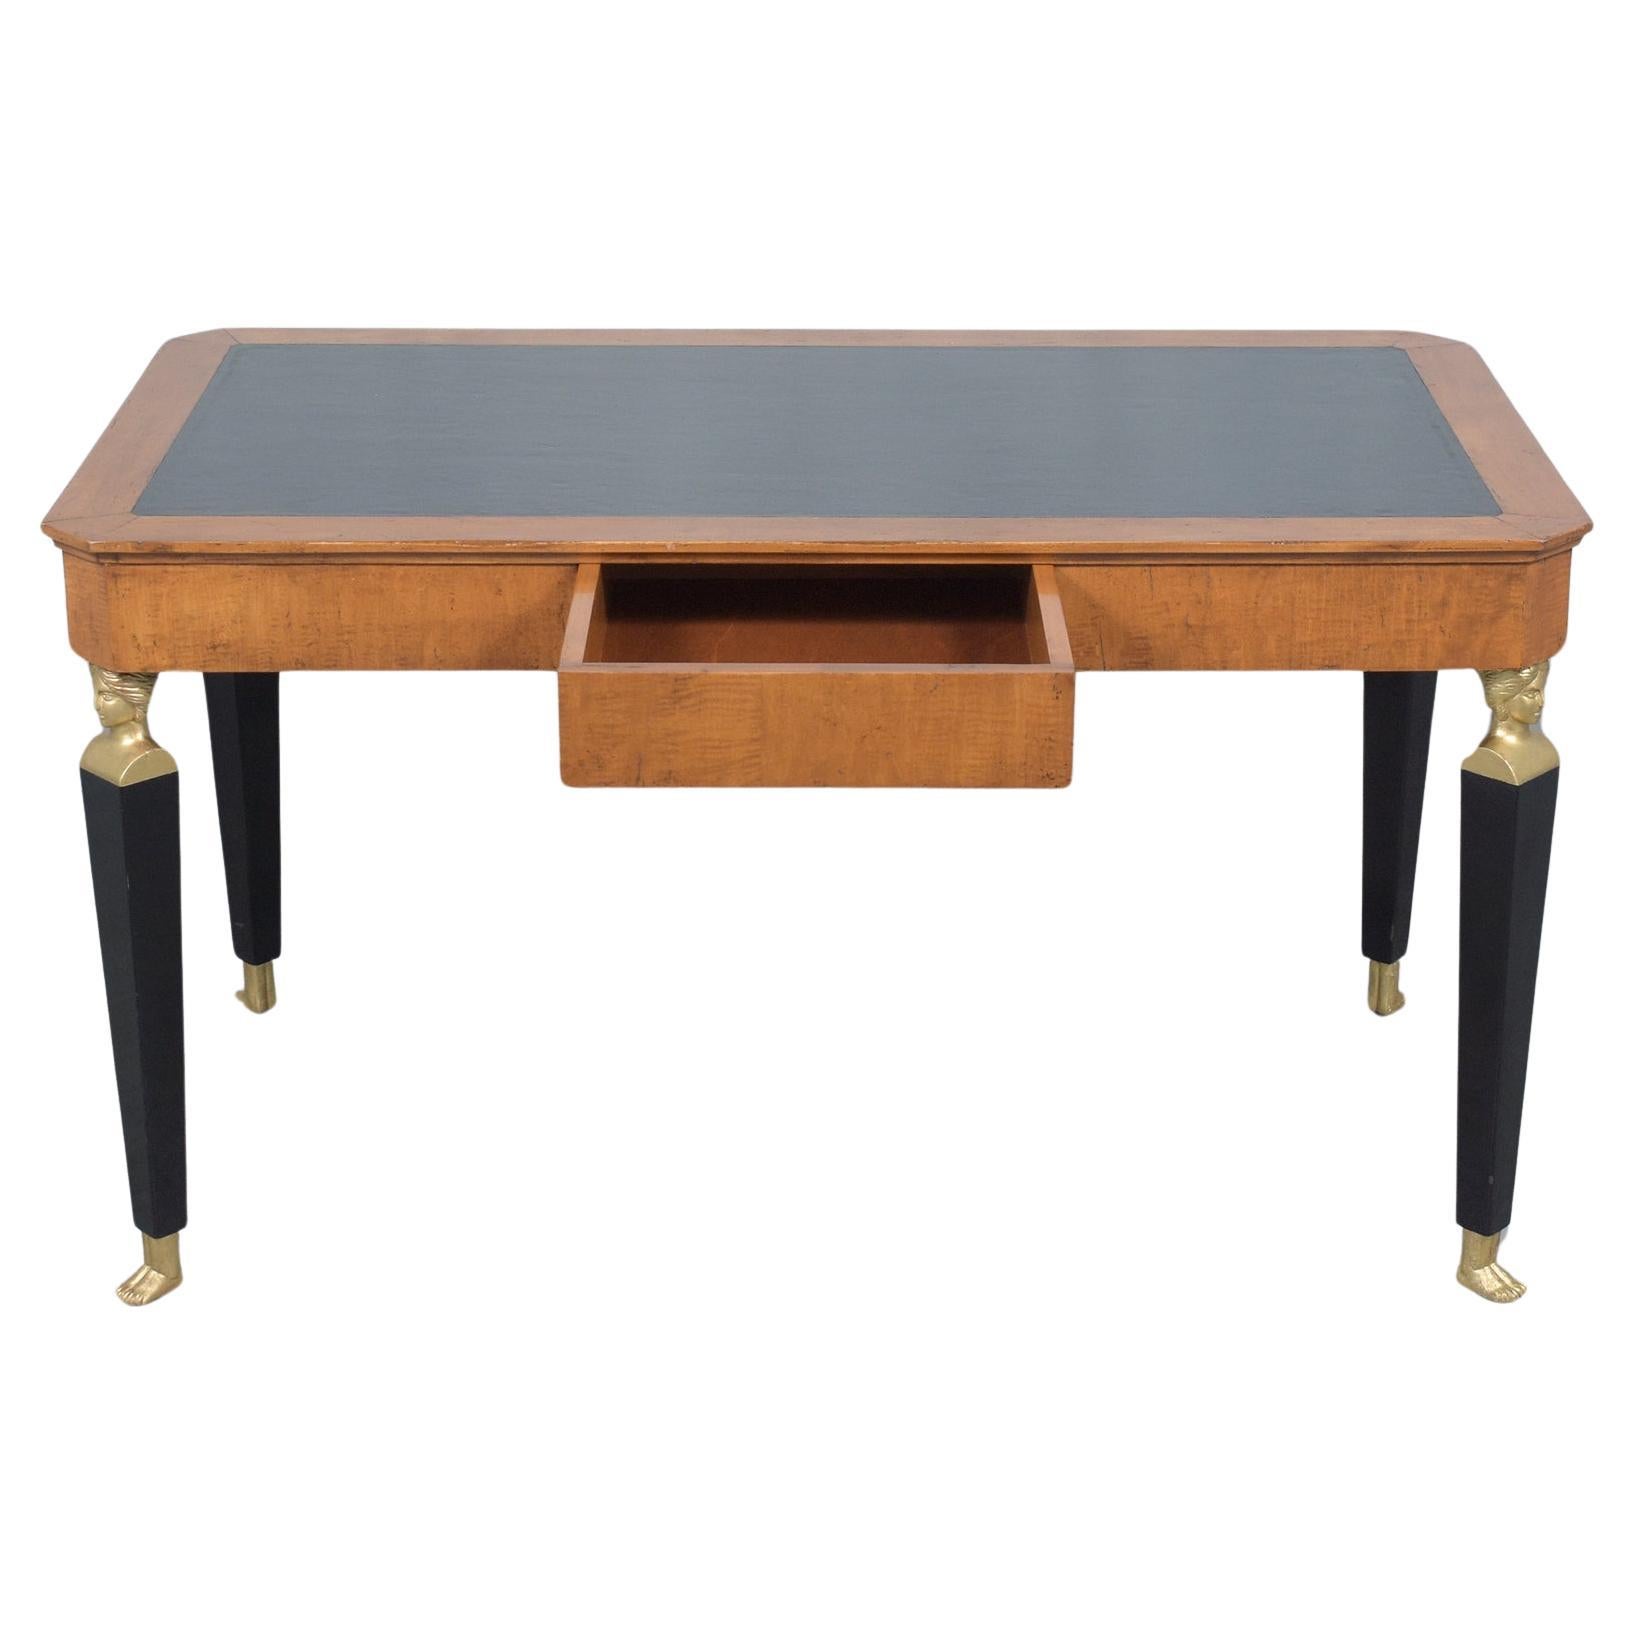 Restored 1970 Empire Desk: Light Walnut & Ebonized Finish with Green Leather Top For Sale